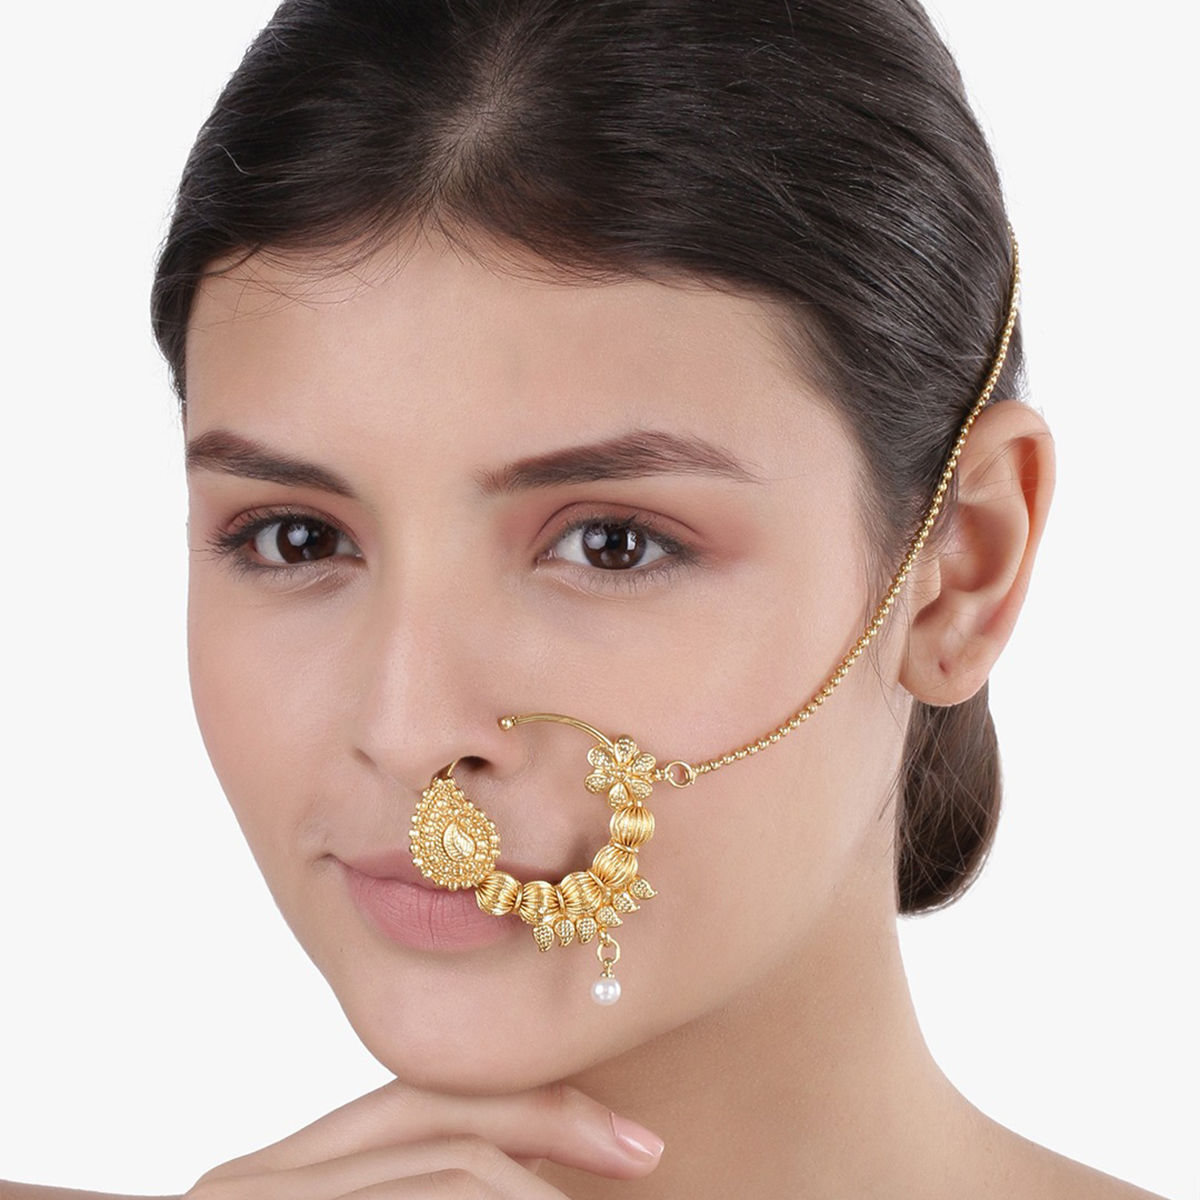 Nose Ring/pin collection - YouTube